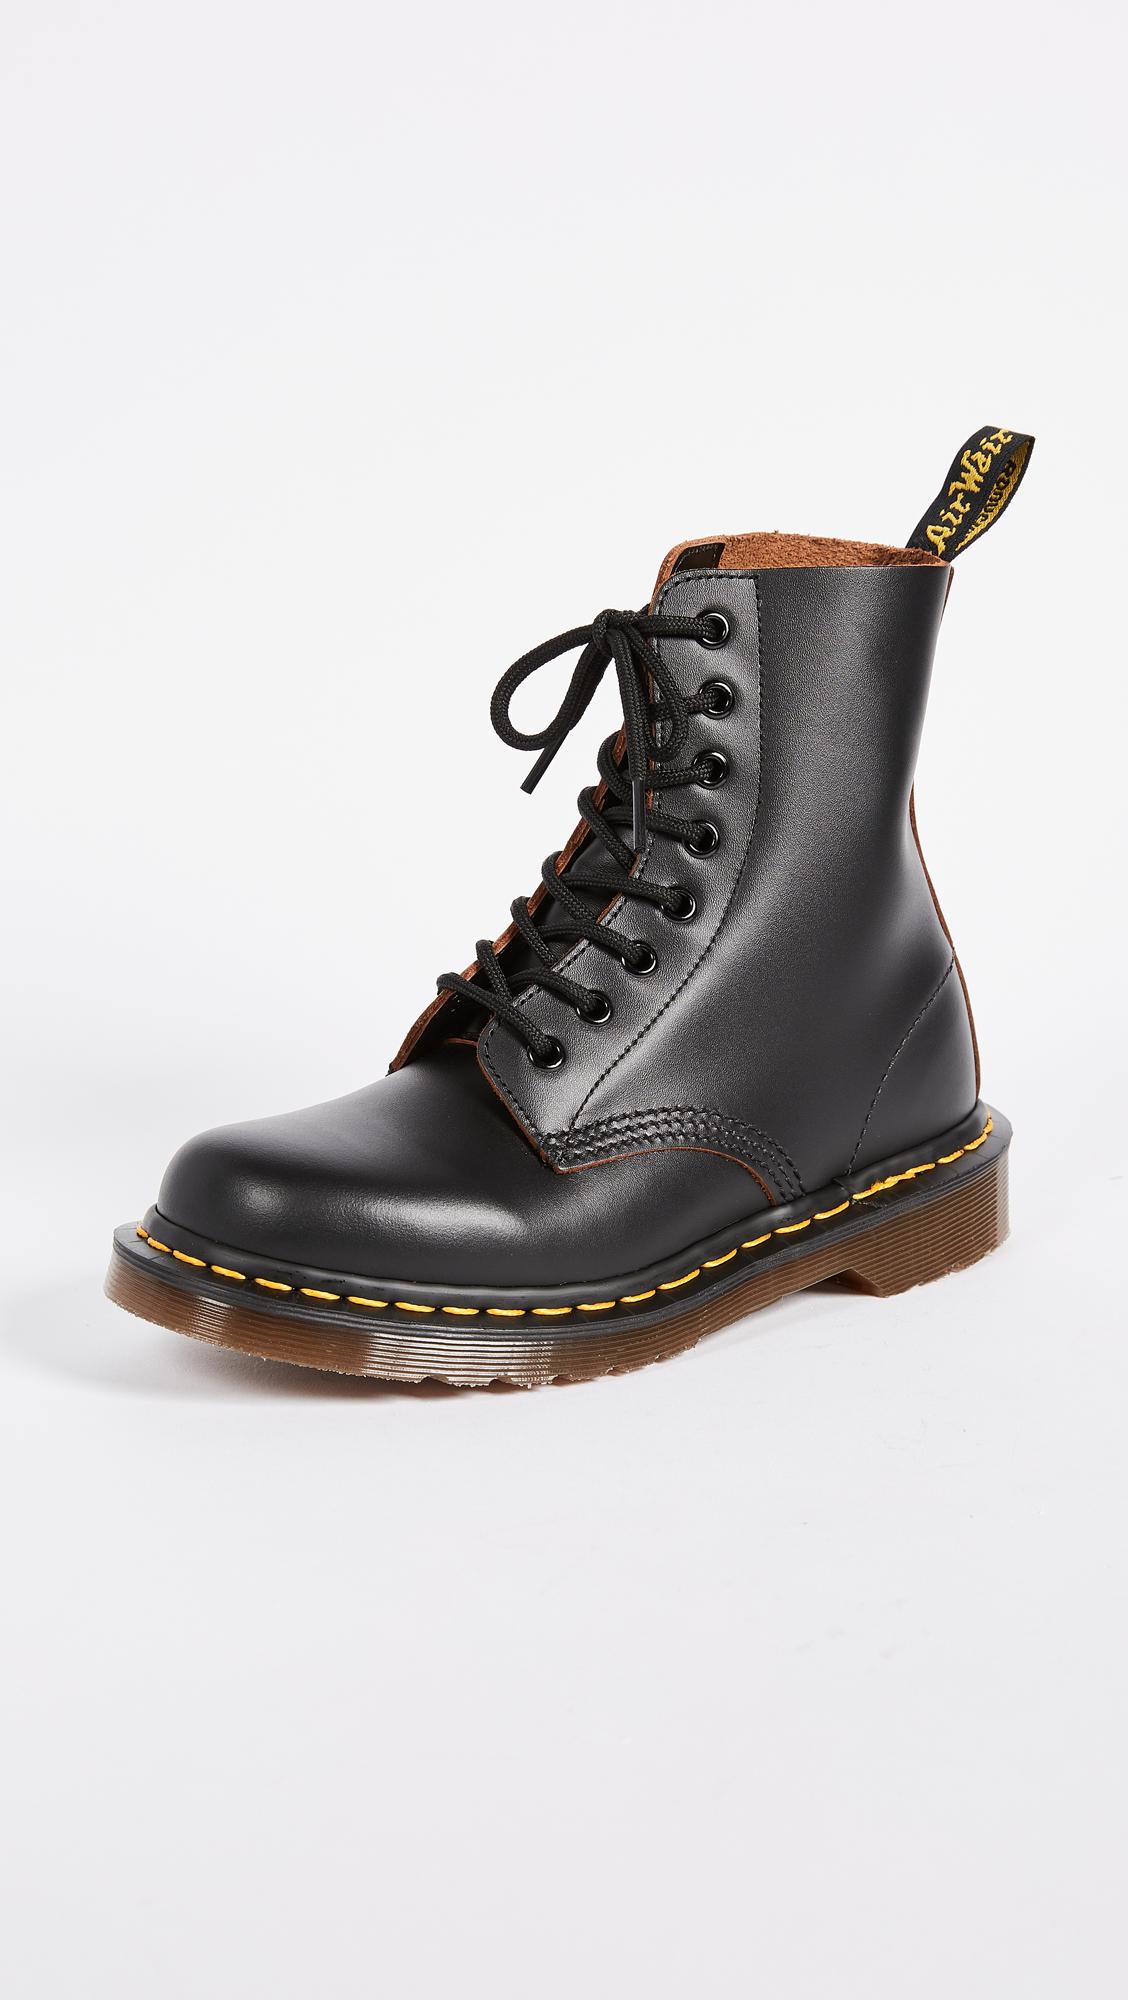 Dr. Martens Leather 1460 8 Eye Boots in Black - Save 13% - Lyst